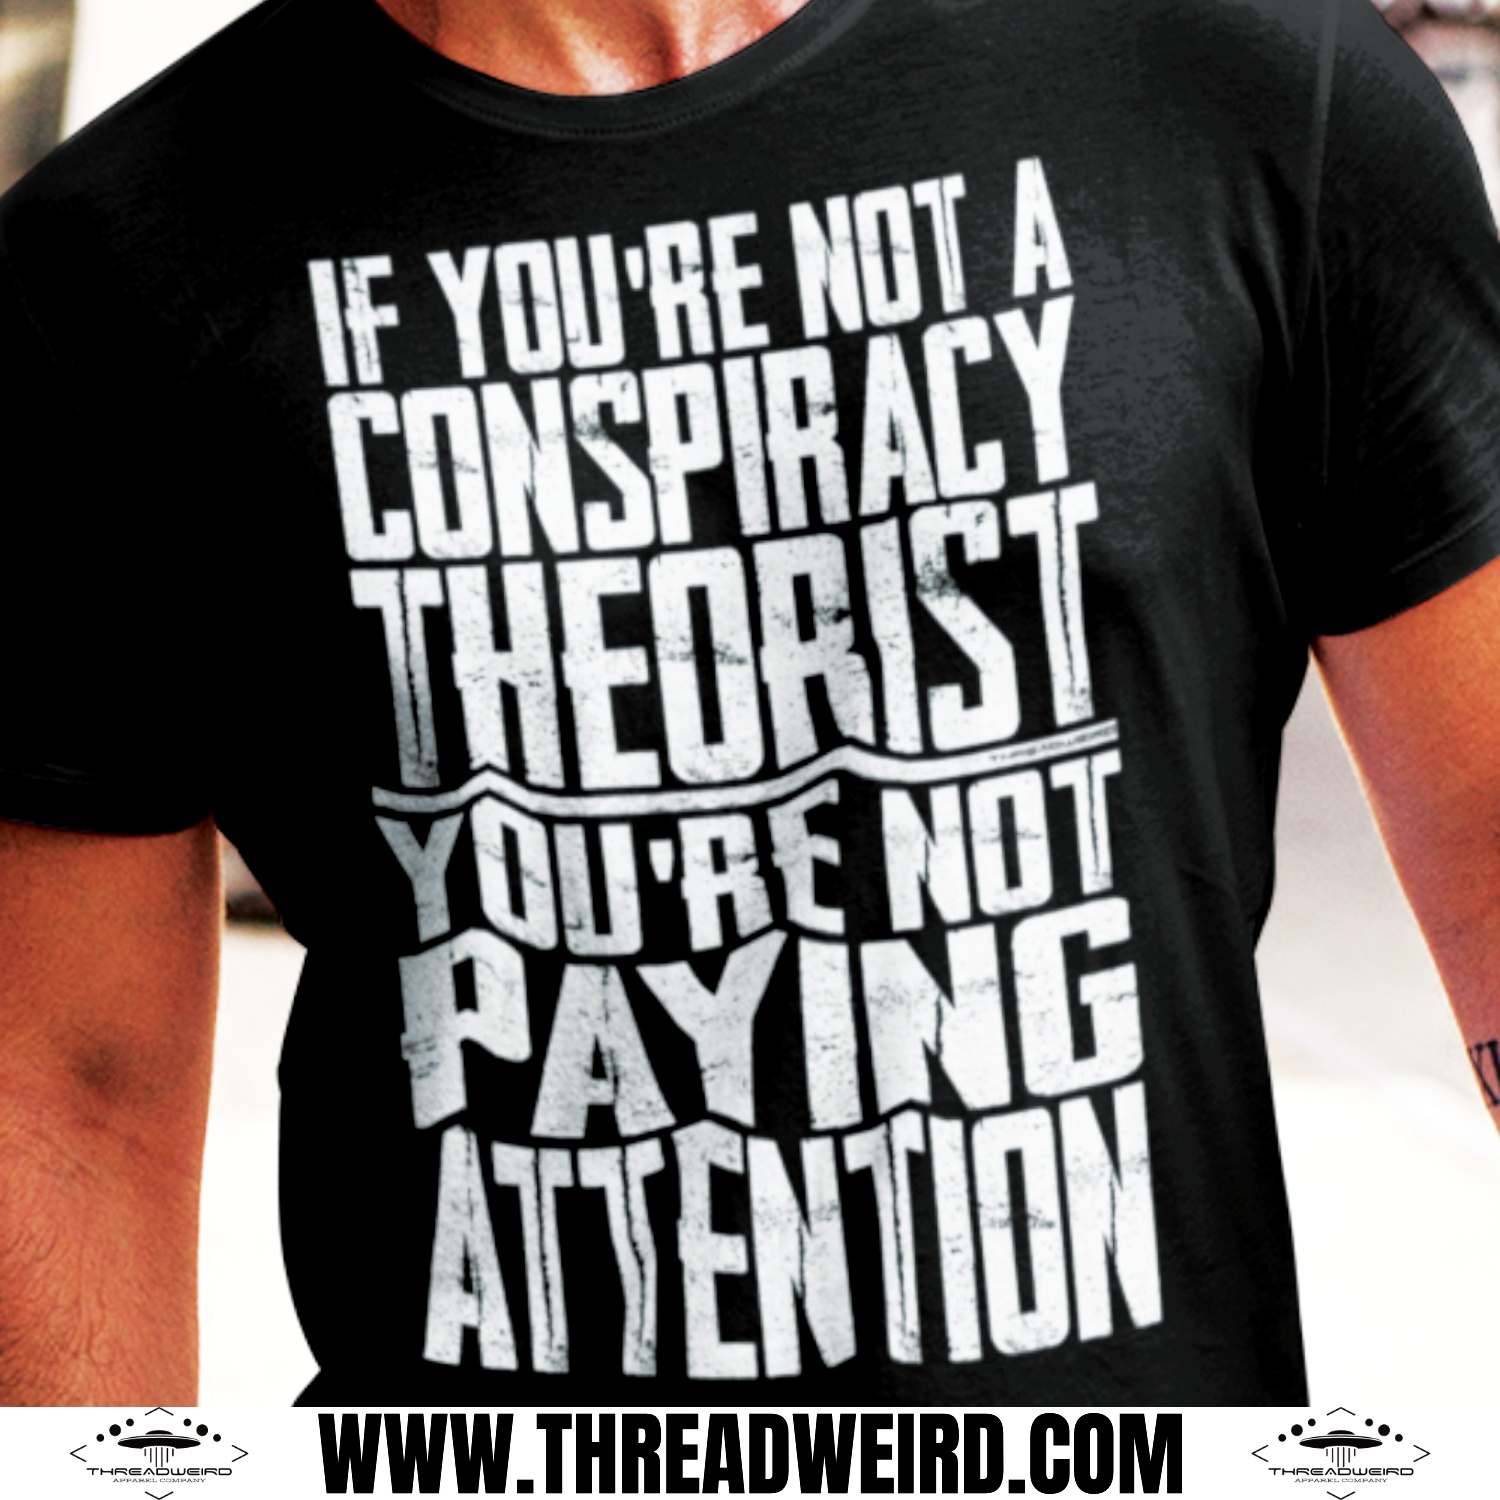 If you're not a conspiracy theorist you're not paying attention